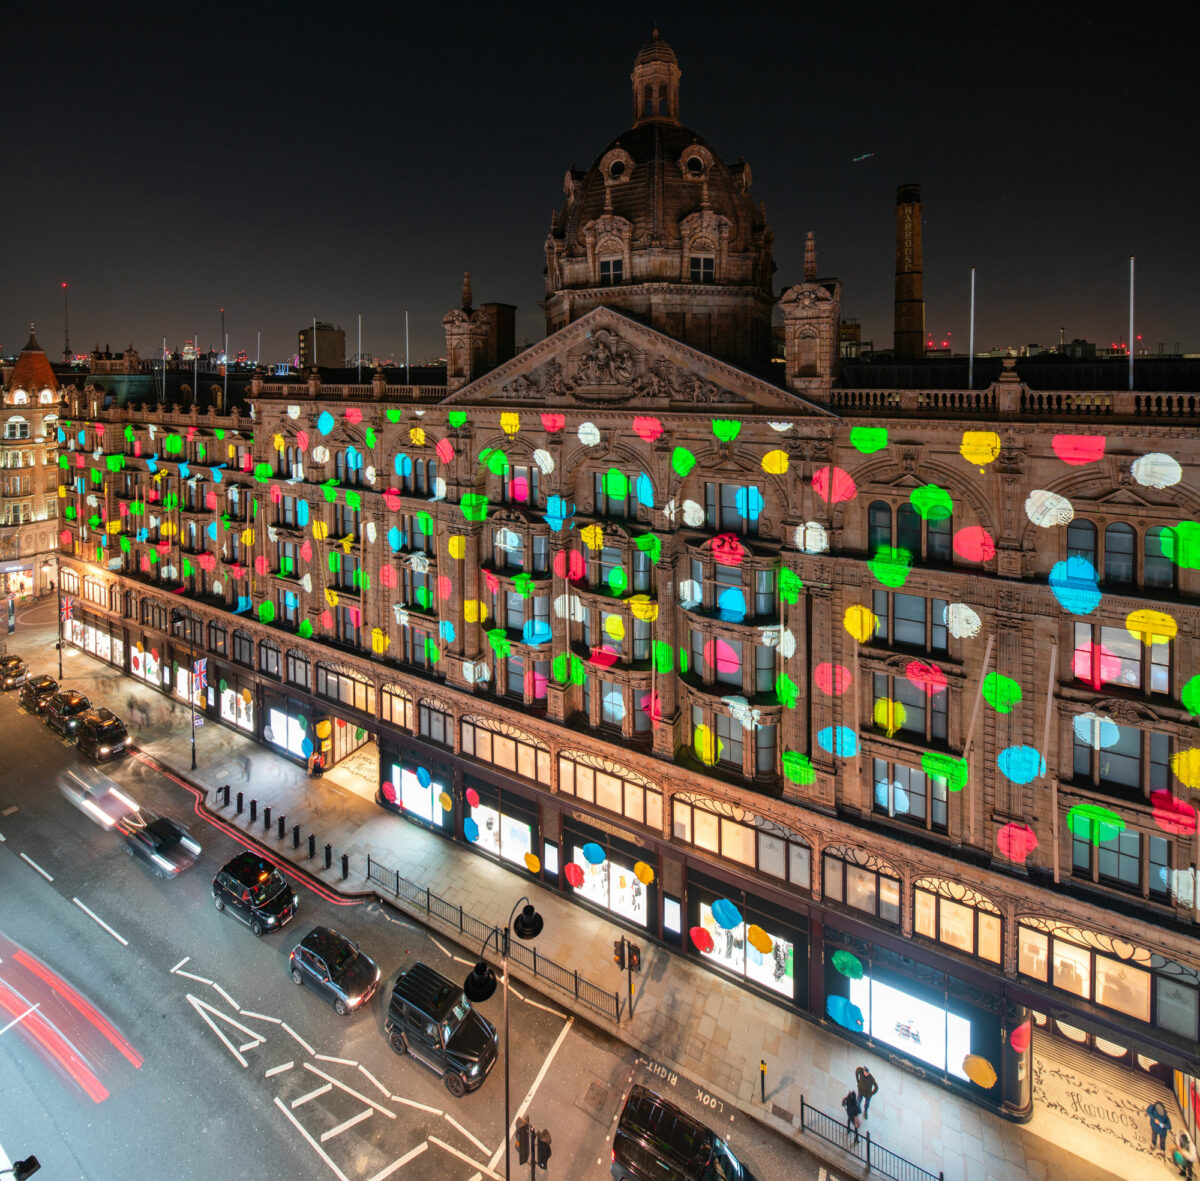 Louis Vuitton has celebrated a collaboration with Yayoi Kusama by projecting the artist's designs onto the façade of Harrods - a media first.